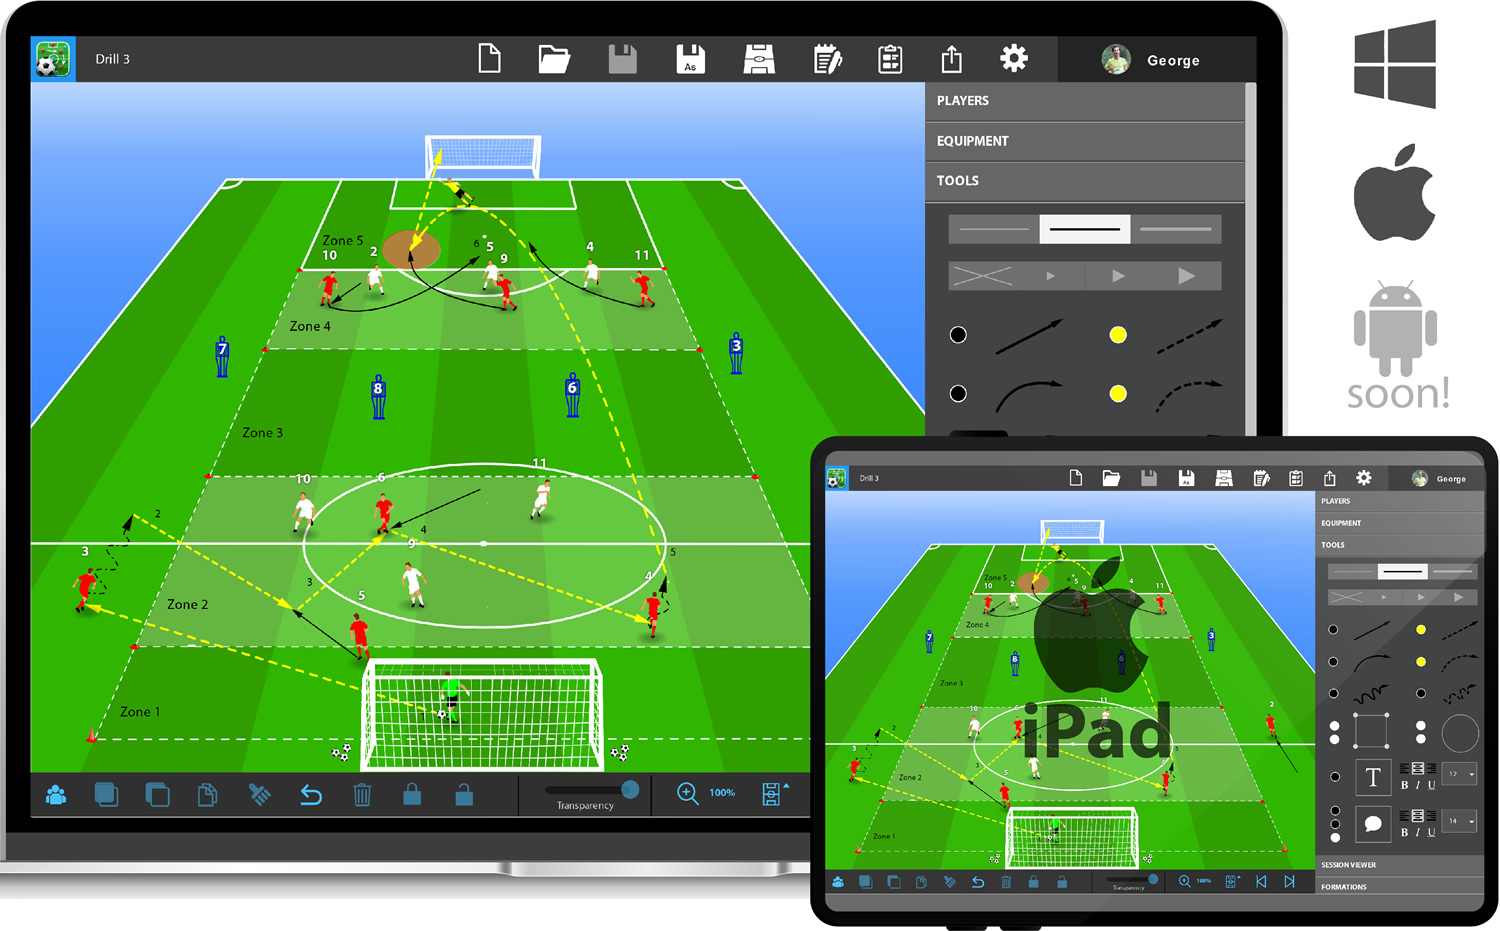 Soccer Tutor - Free Practices and Tactics from the World's Top Coaches